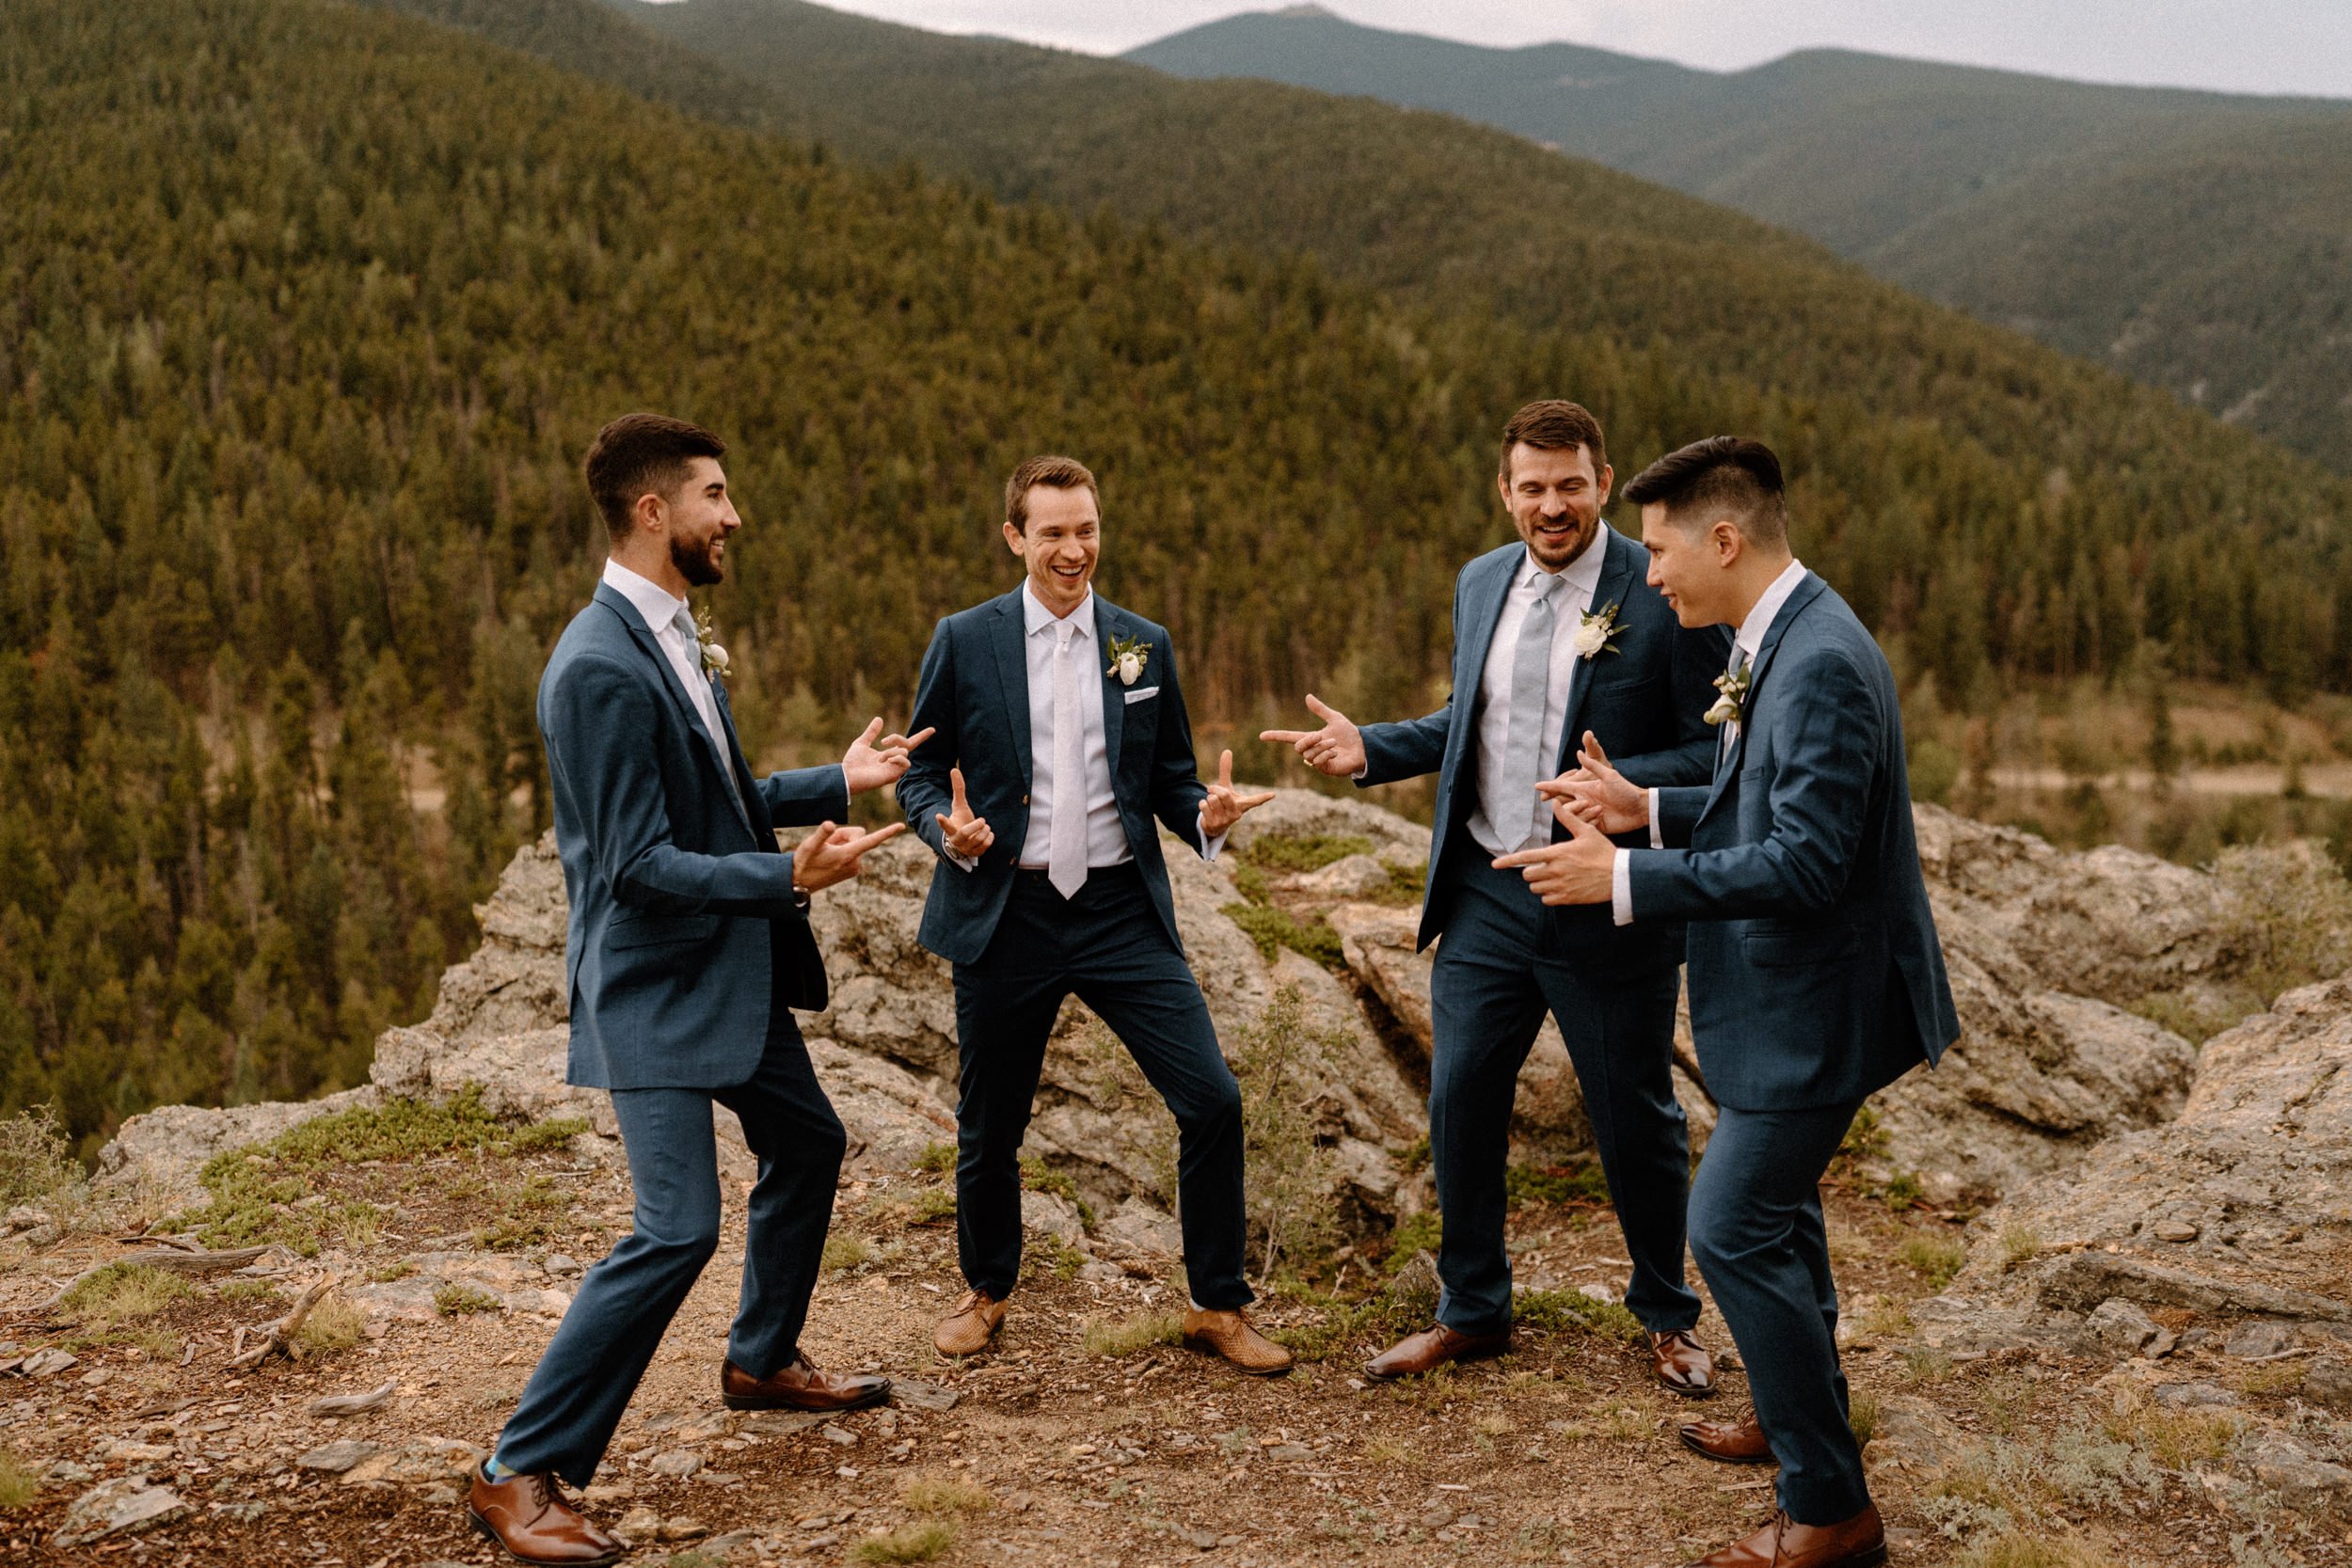 The groomsmen pose in a circle and point finger guns at each other